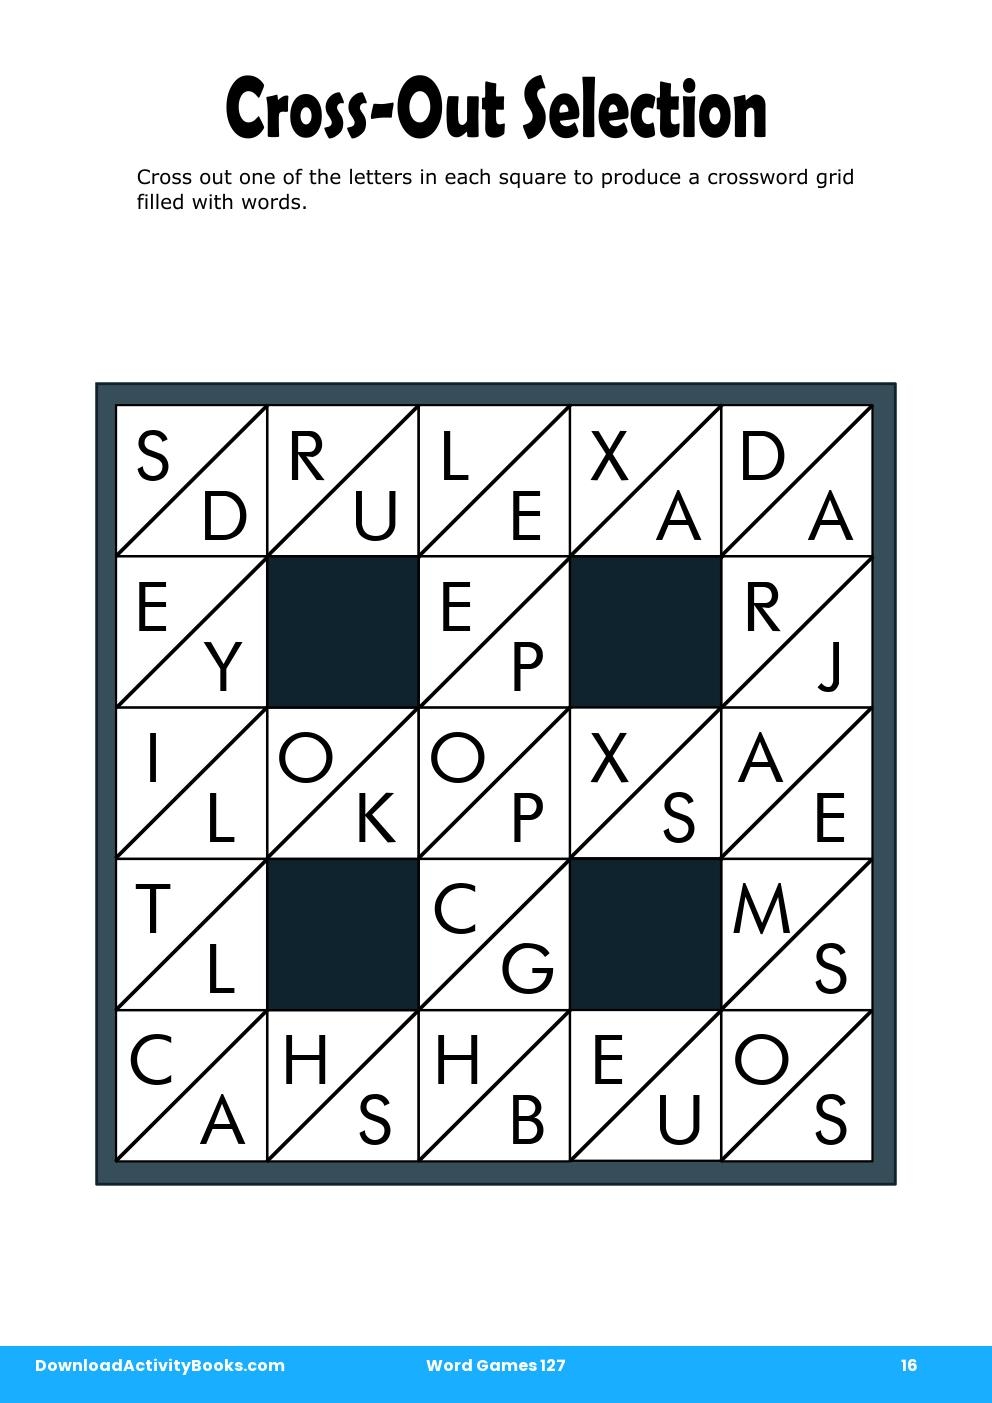 Cross-Out Selection in Word Games 127